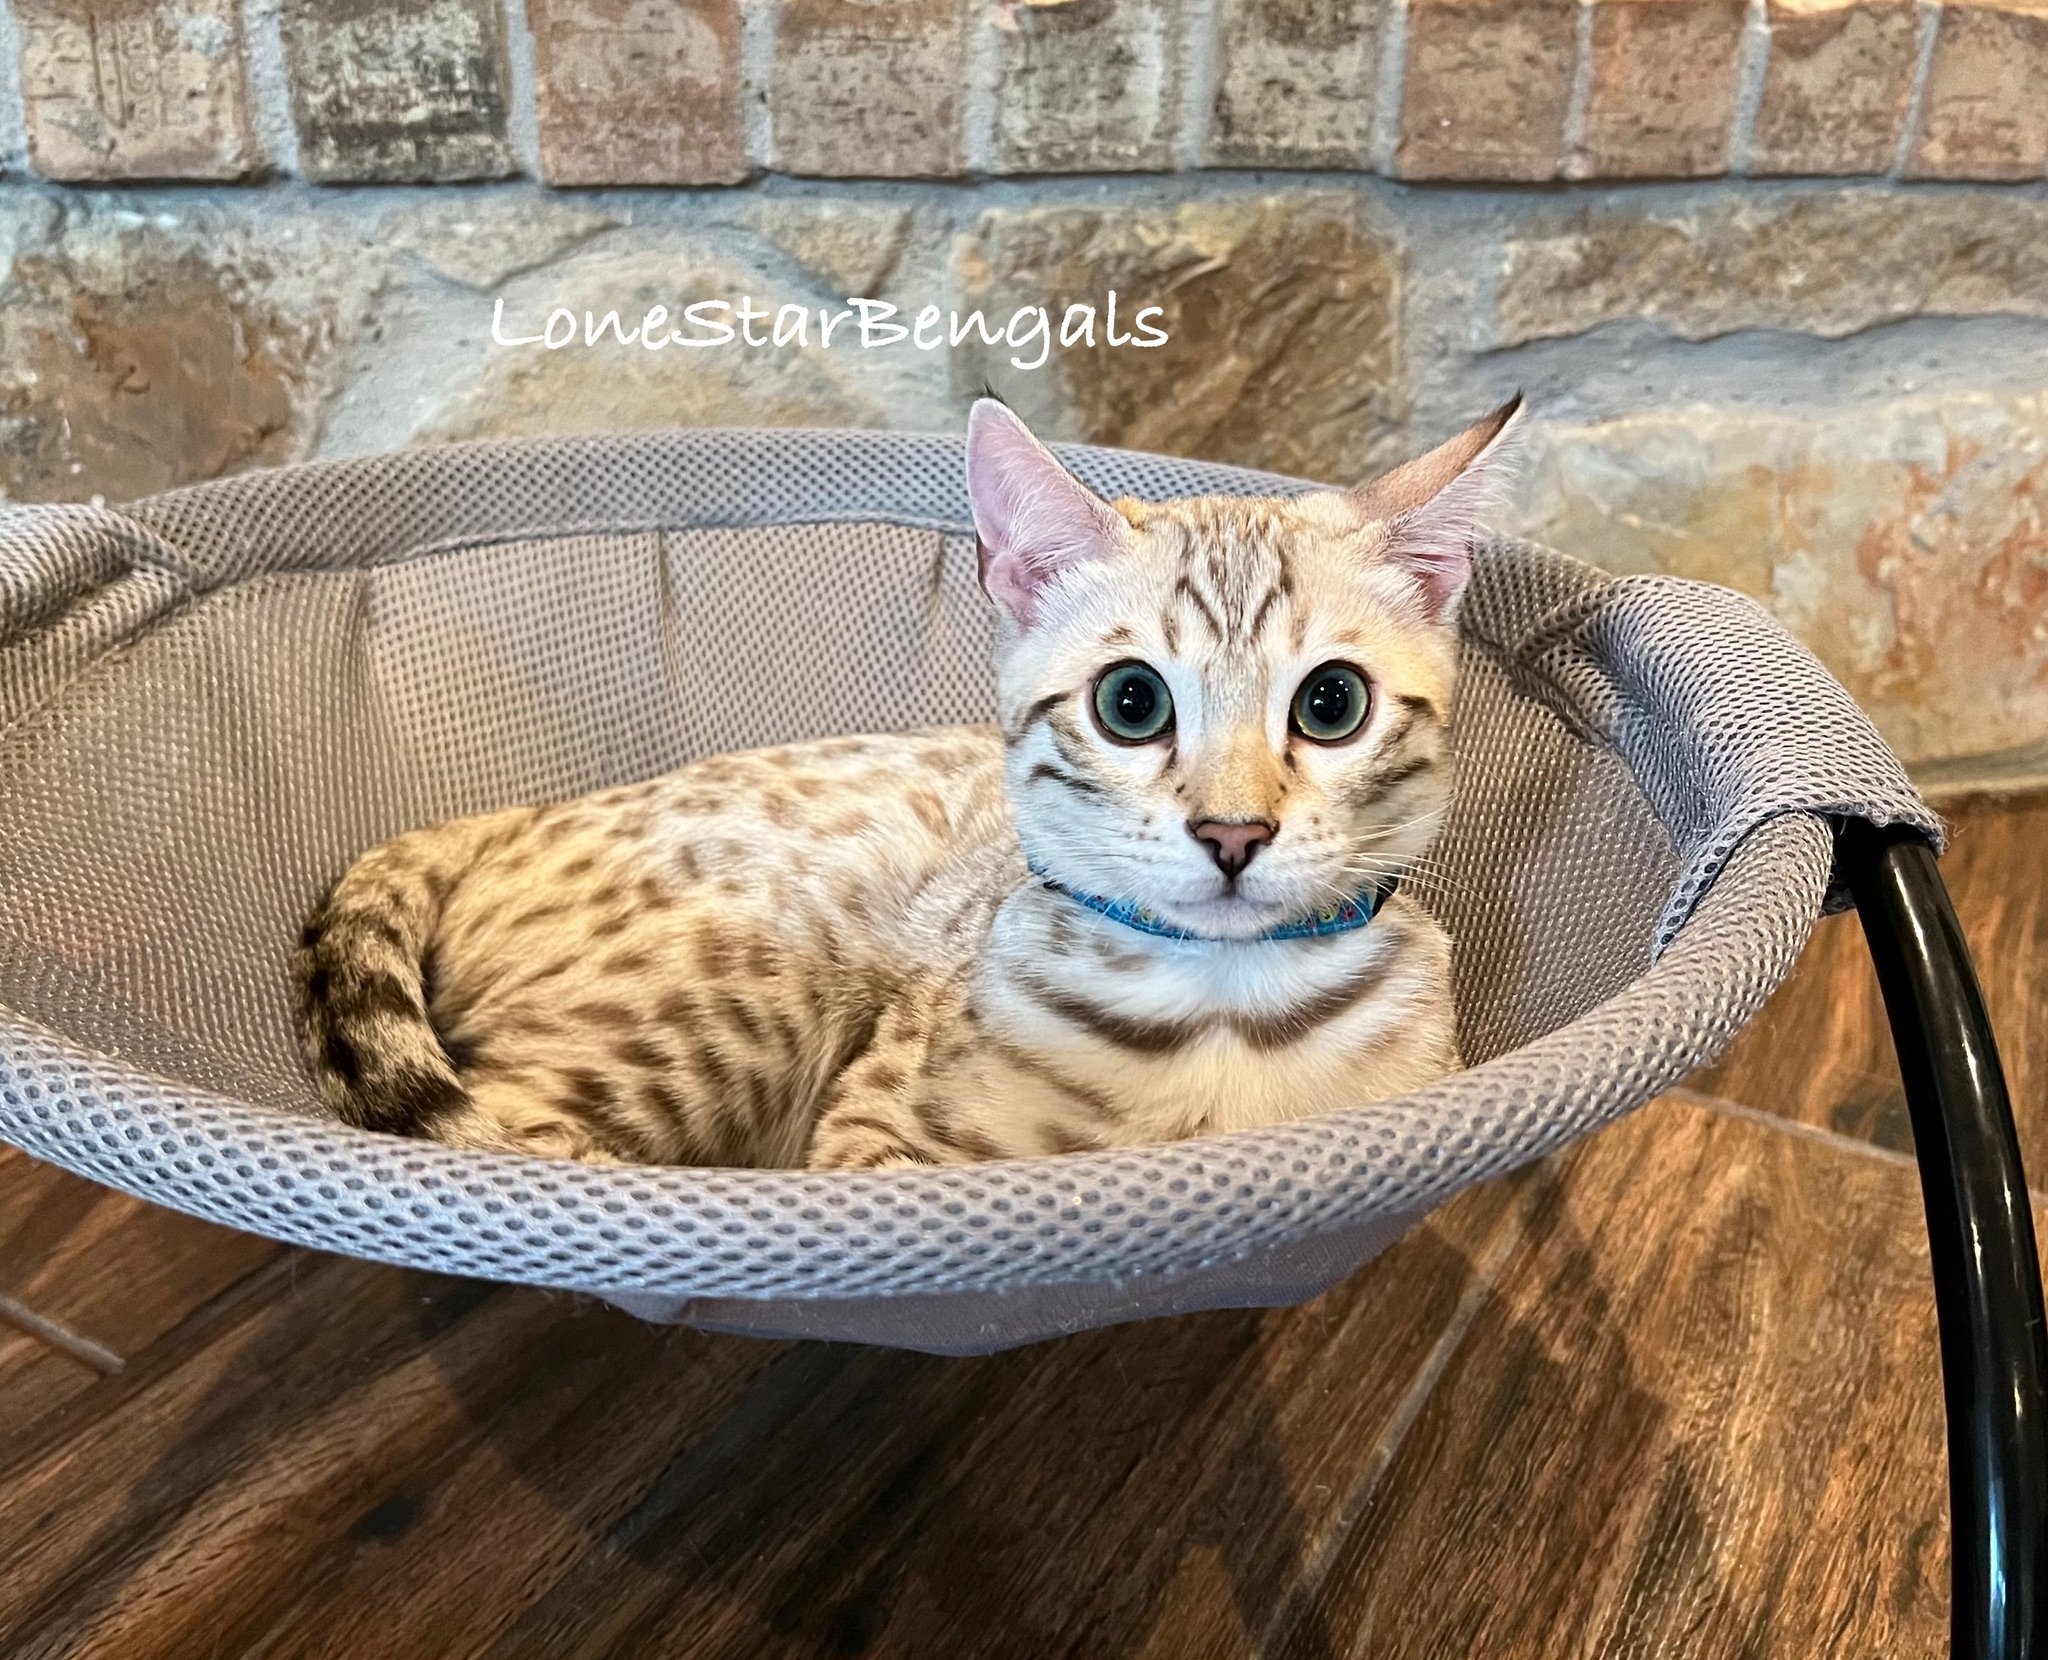 A Superior Quality Bengal cat lounging in a cat bed.